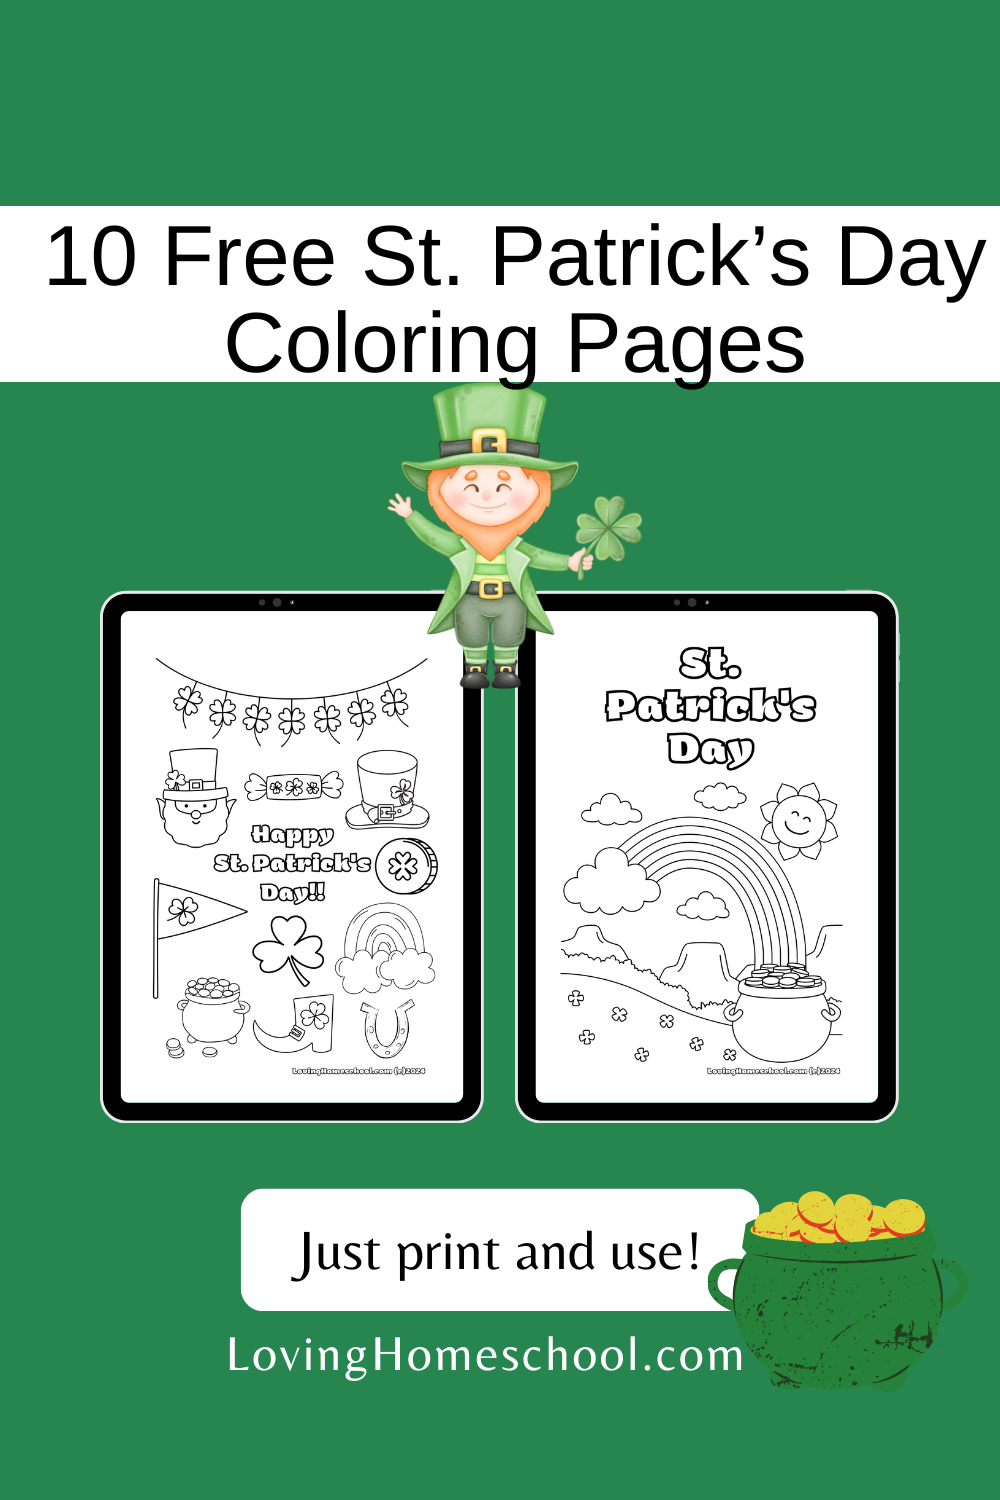 10 Free St. Patrick’s Day Coloring Pages Pinterest Pin